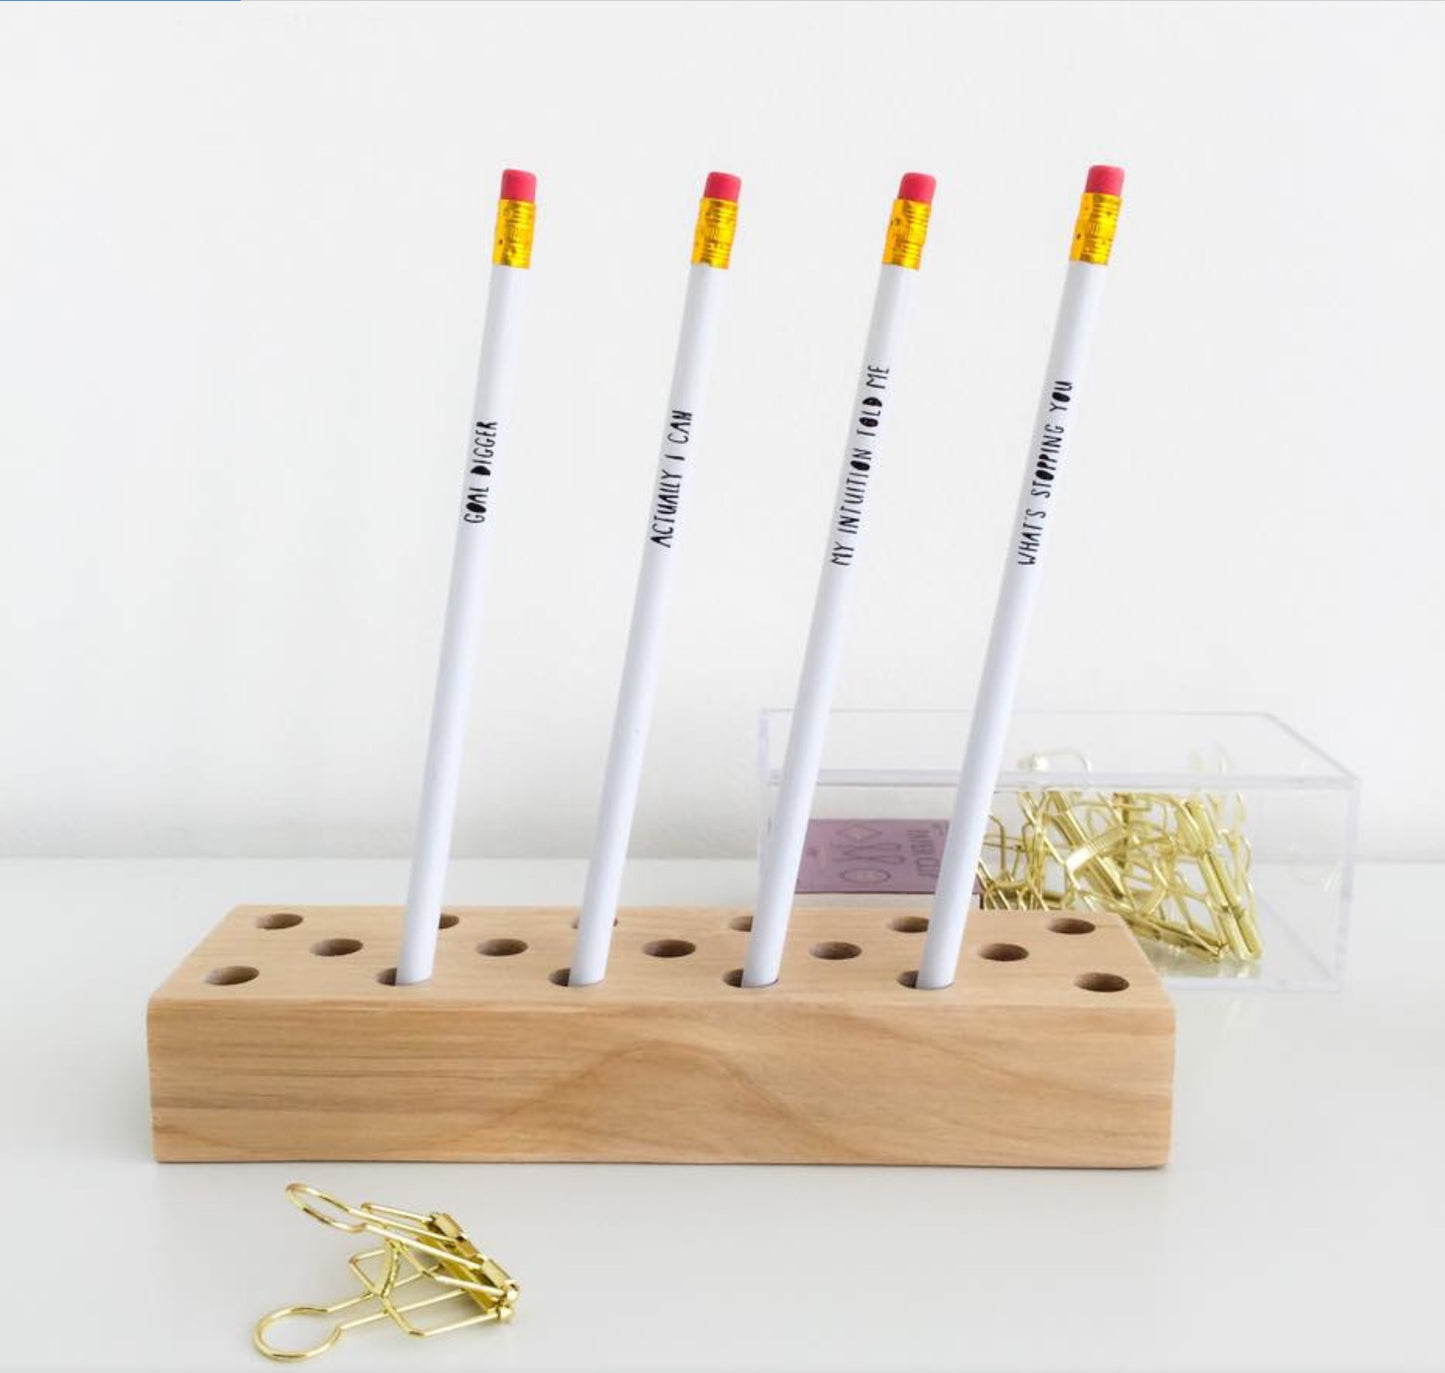 Set of 4 pencils with motivational quotes